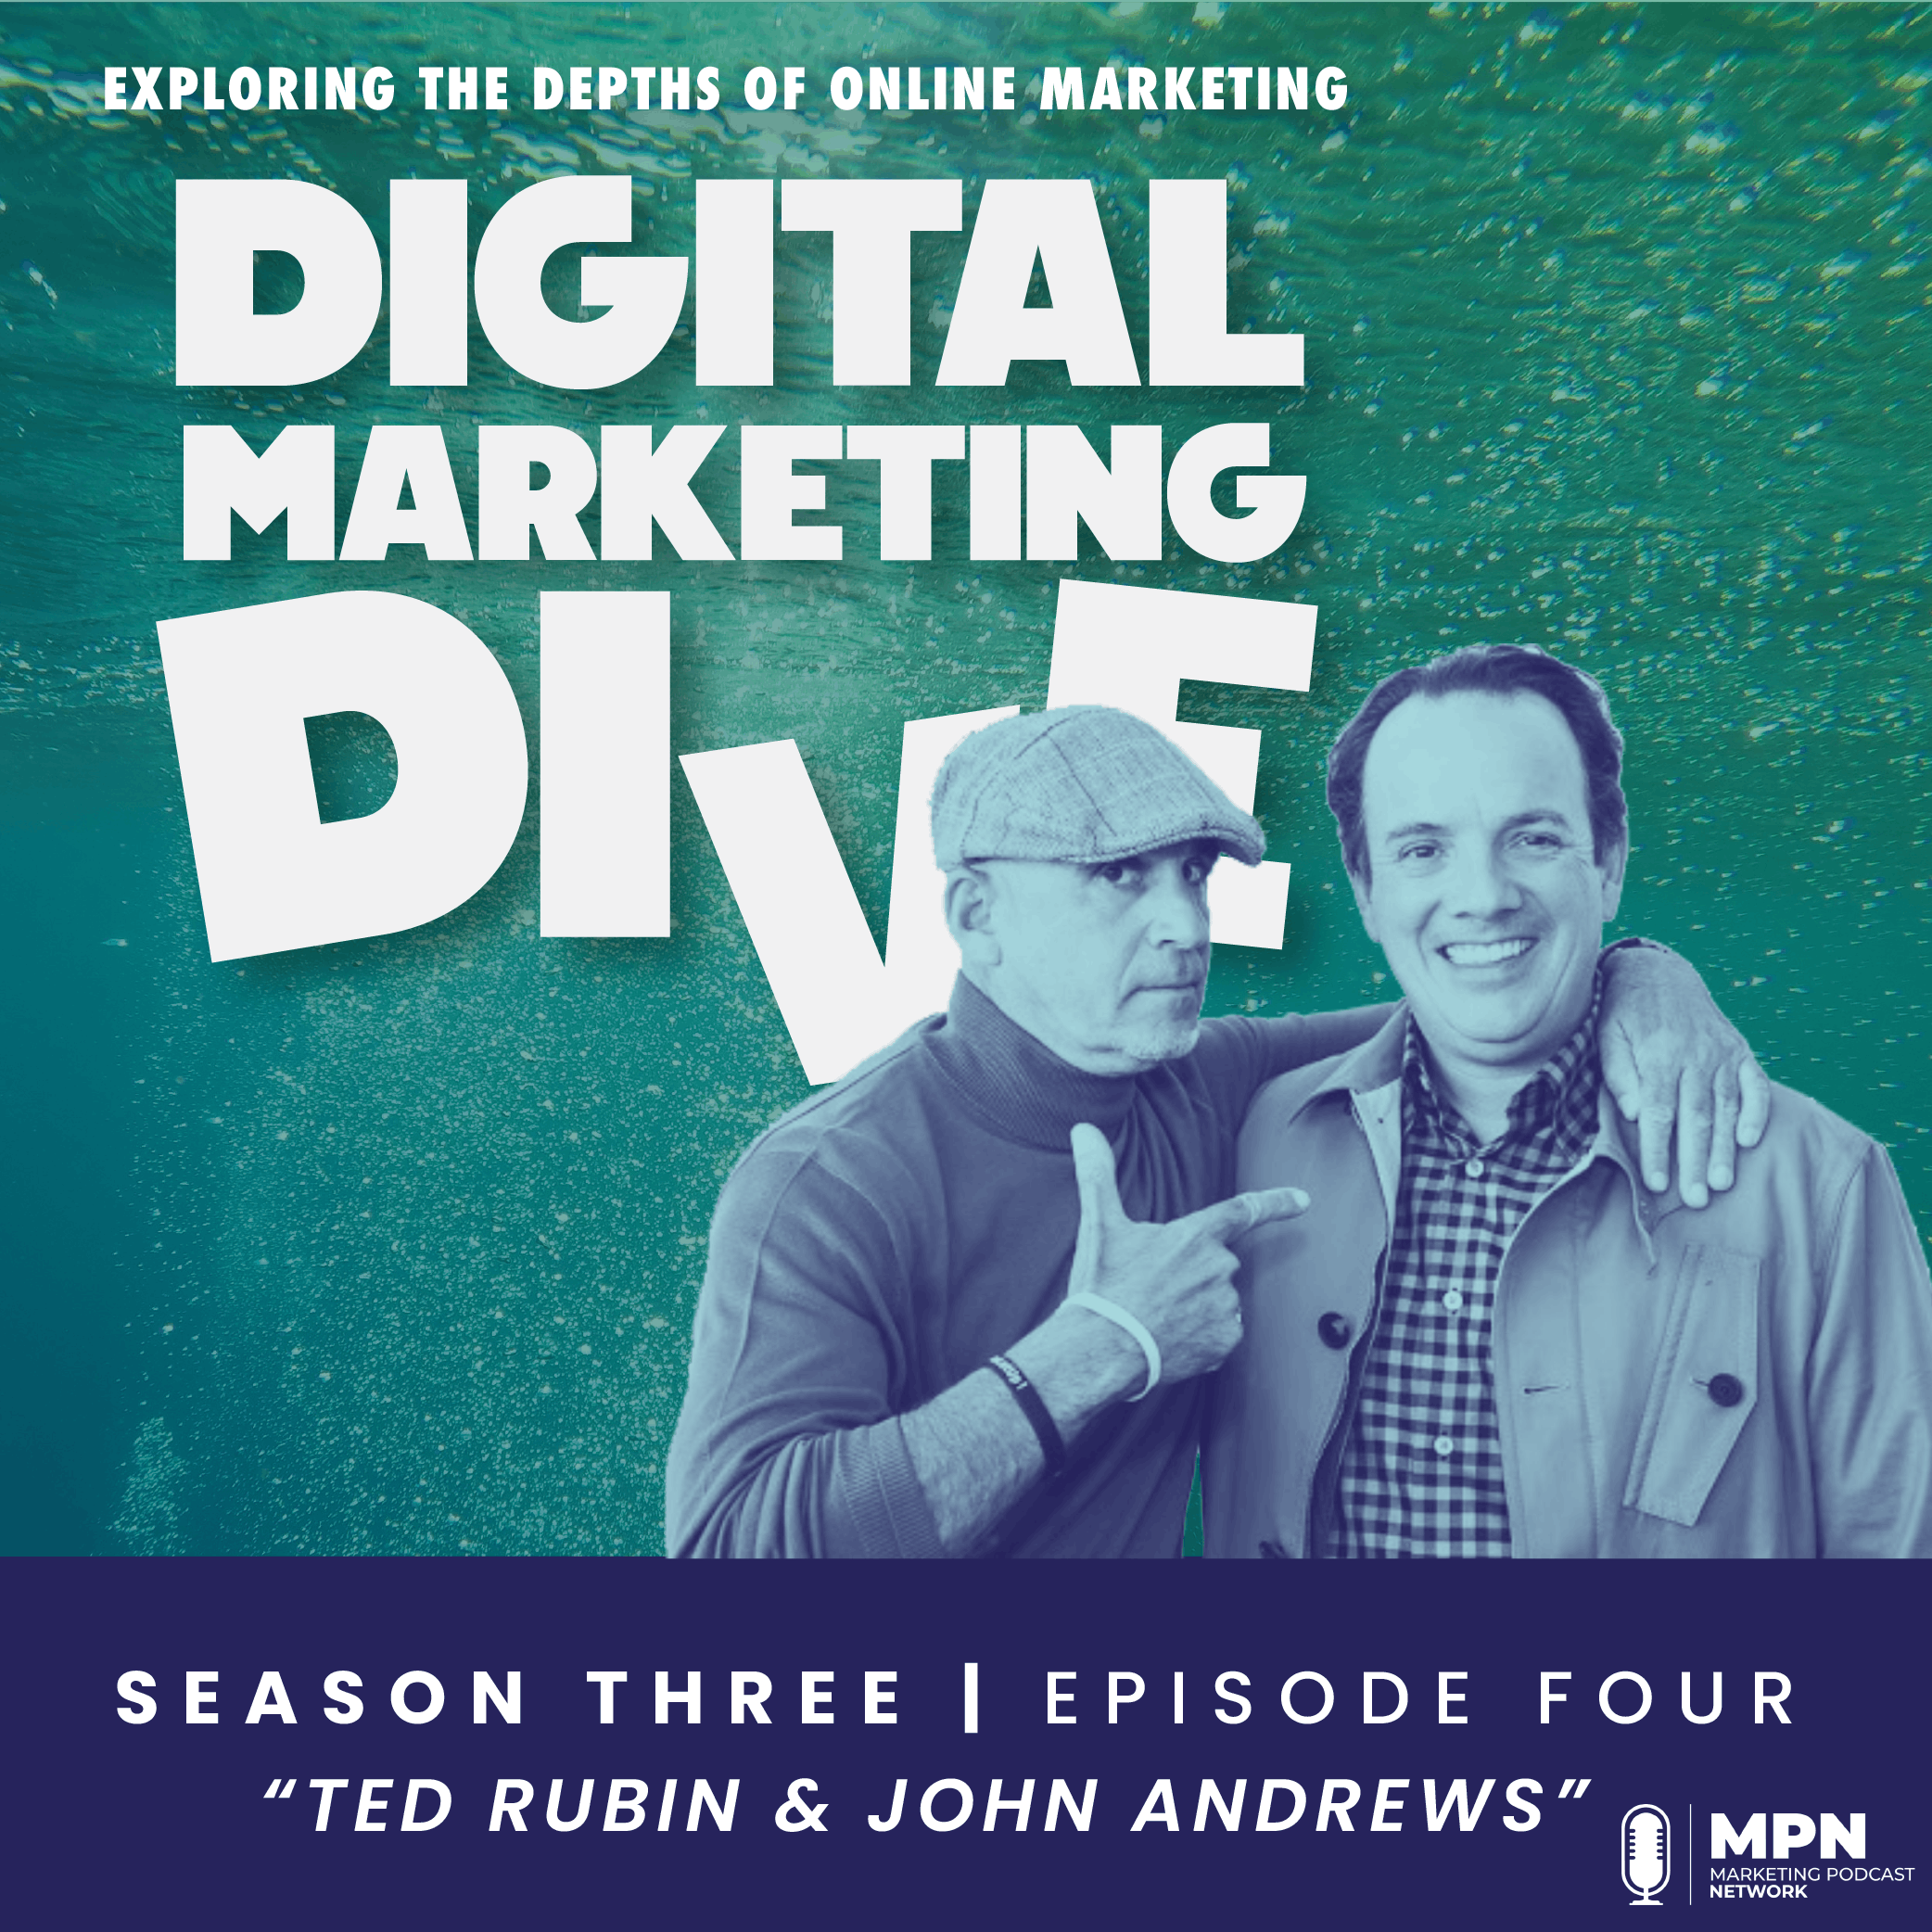 Ted Rubin & John Andrews Talk About Retail Relevancy In This New Online-First Era